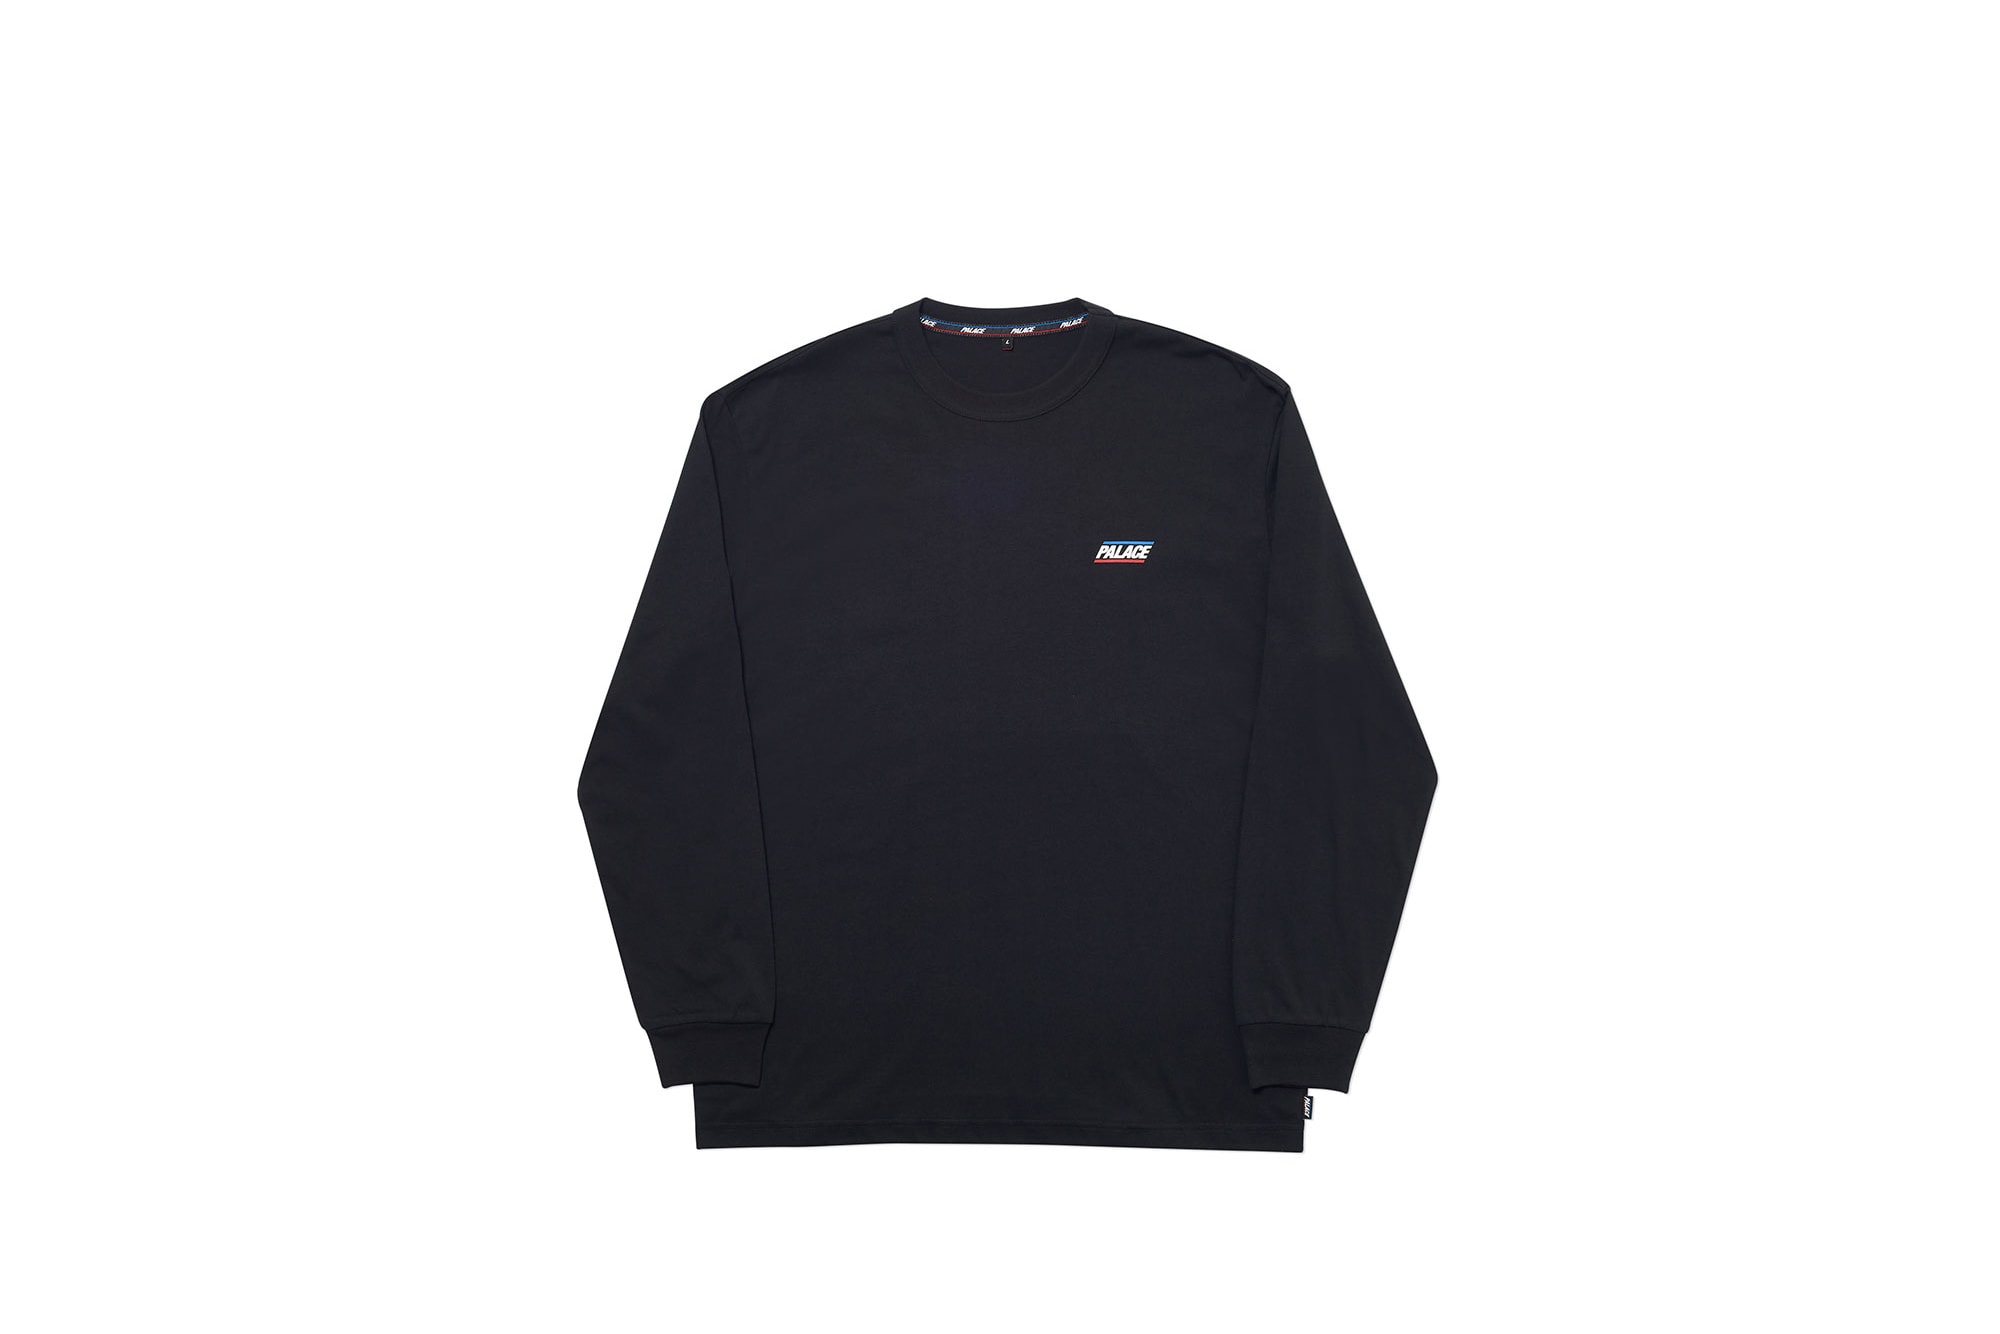 Palace Summer 2020 Longsleeve T-Shirts Release Info Date Buy Price